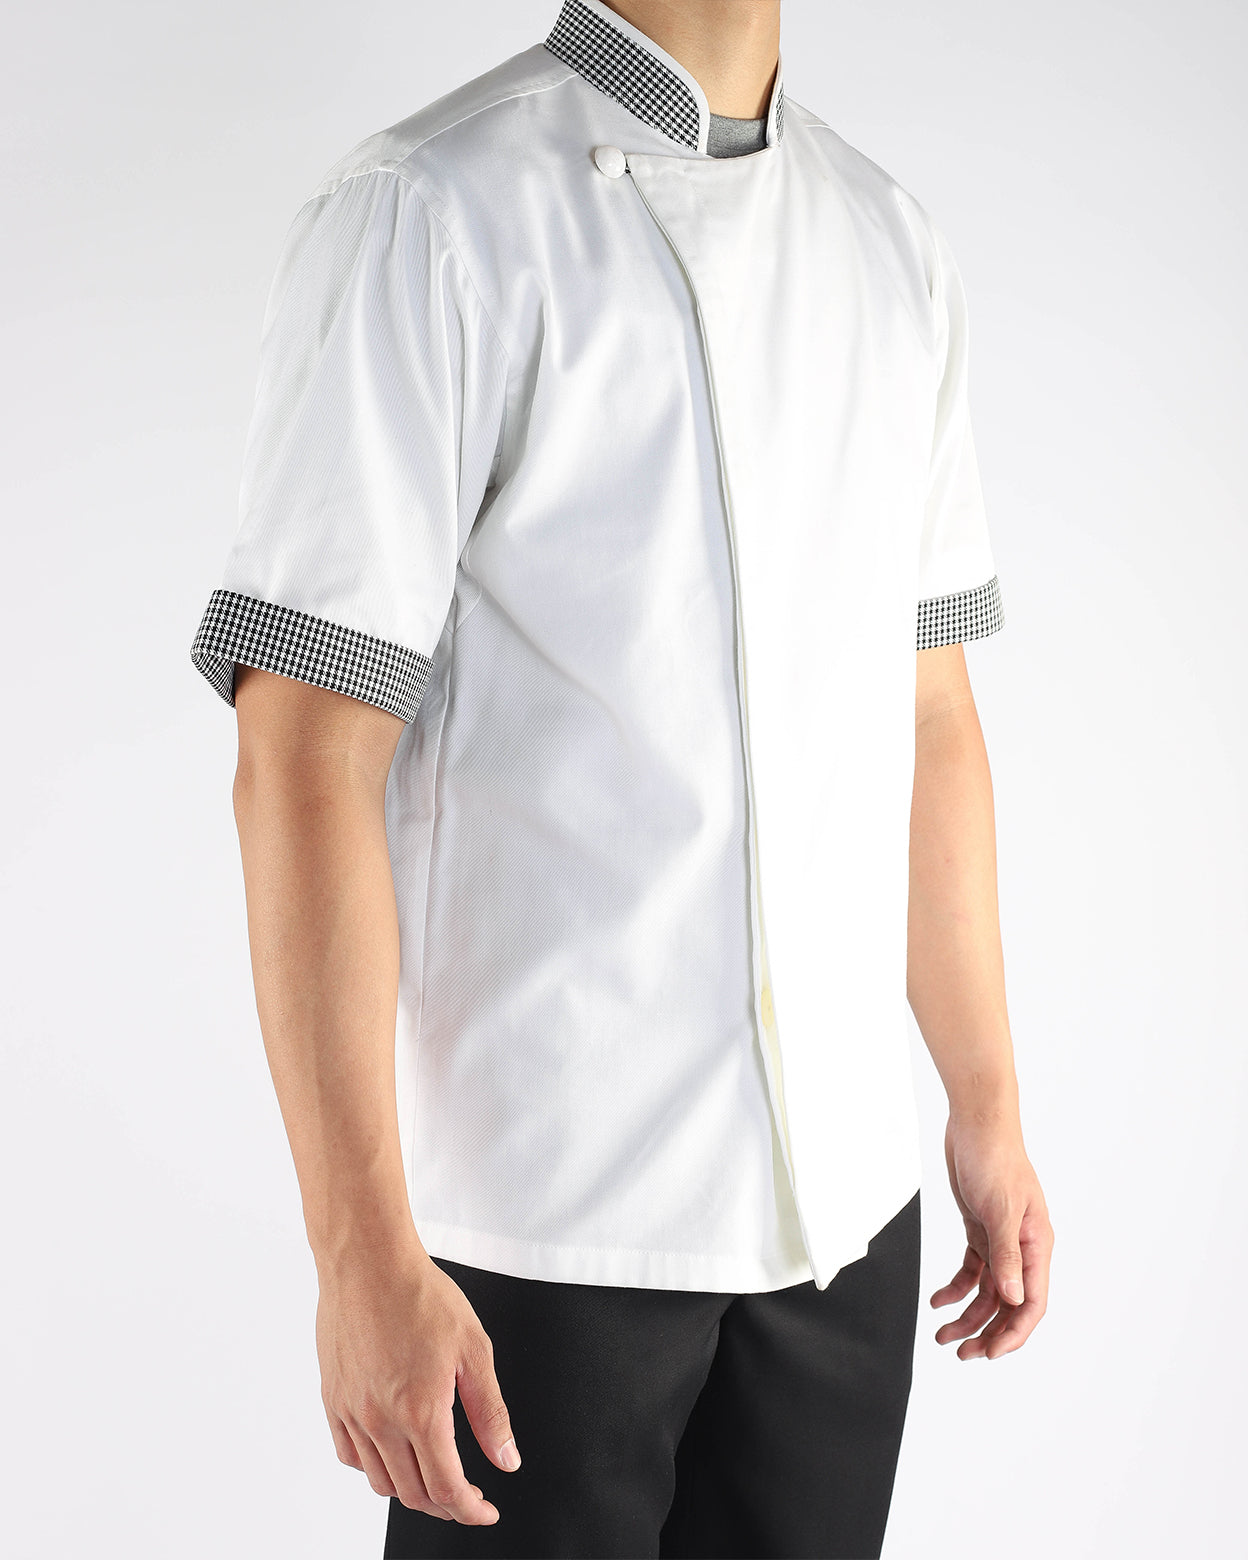 White Chef Jacket with Short Sleeves